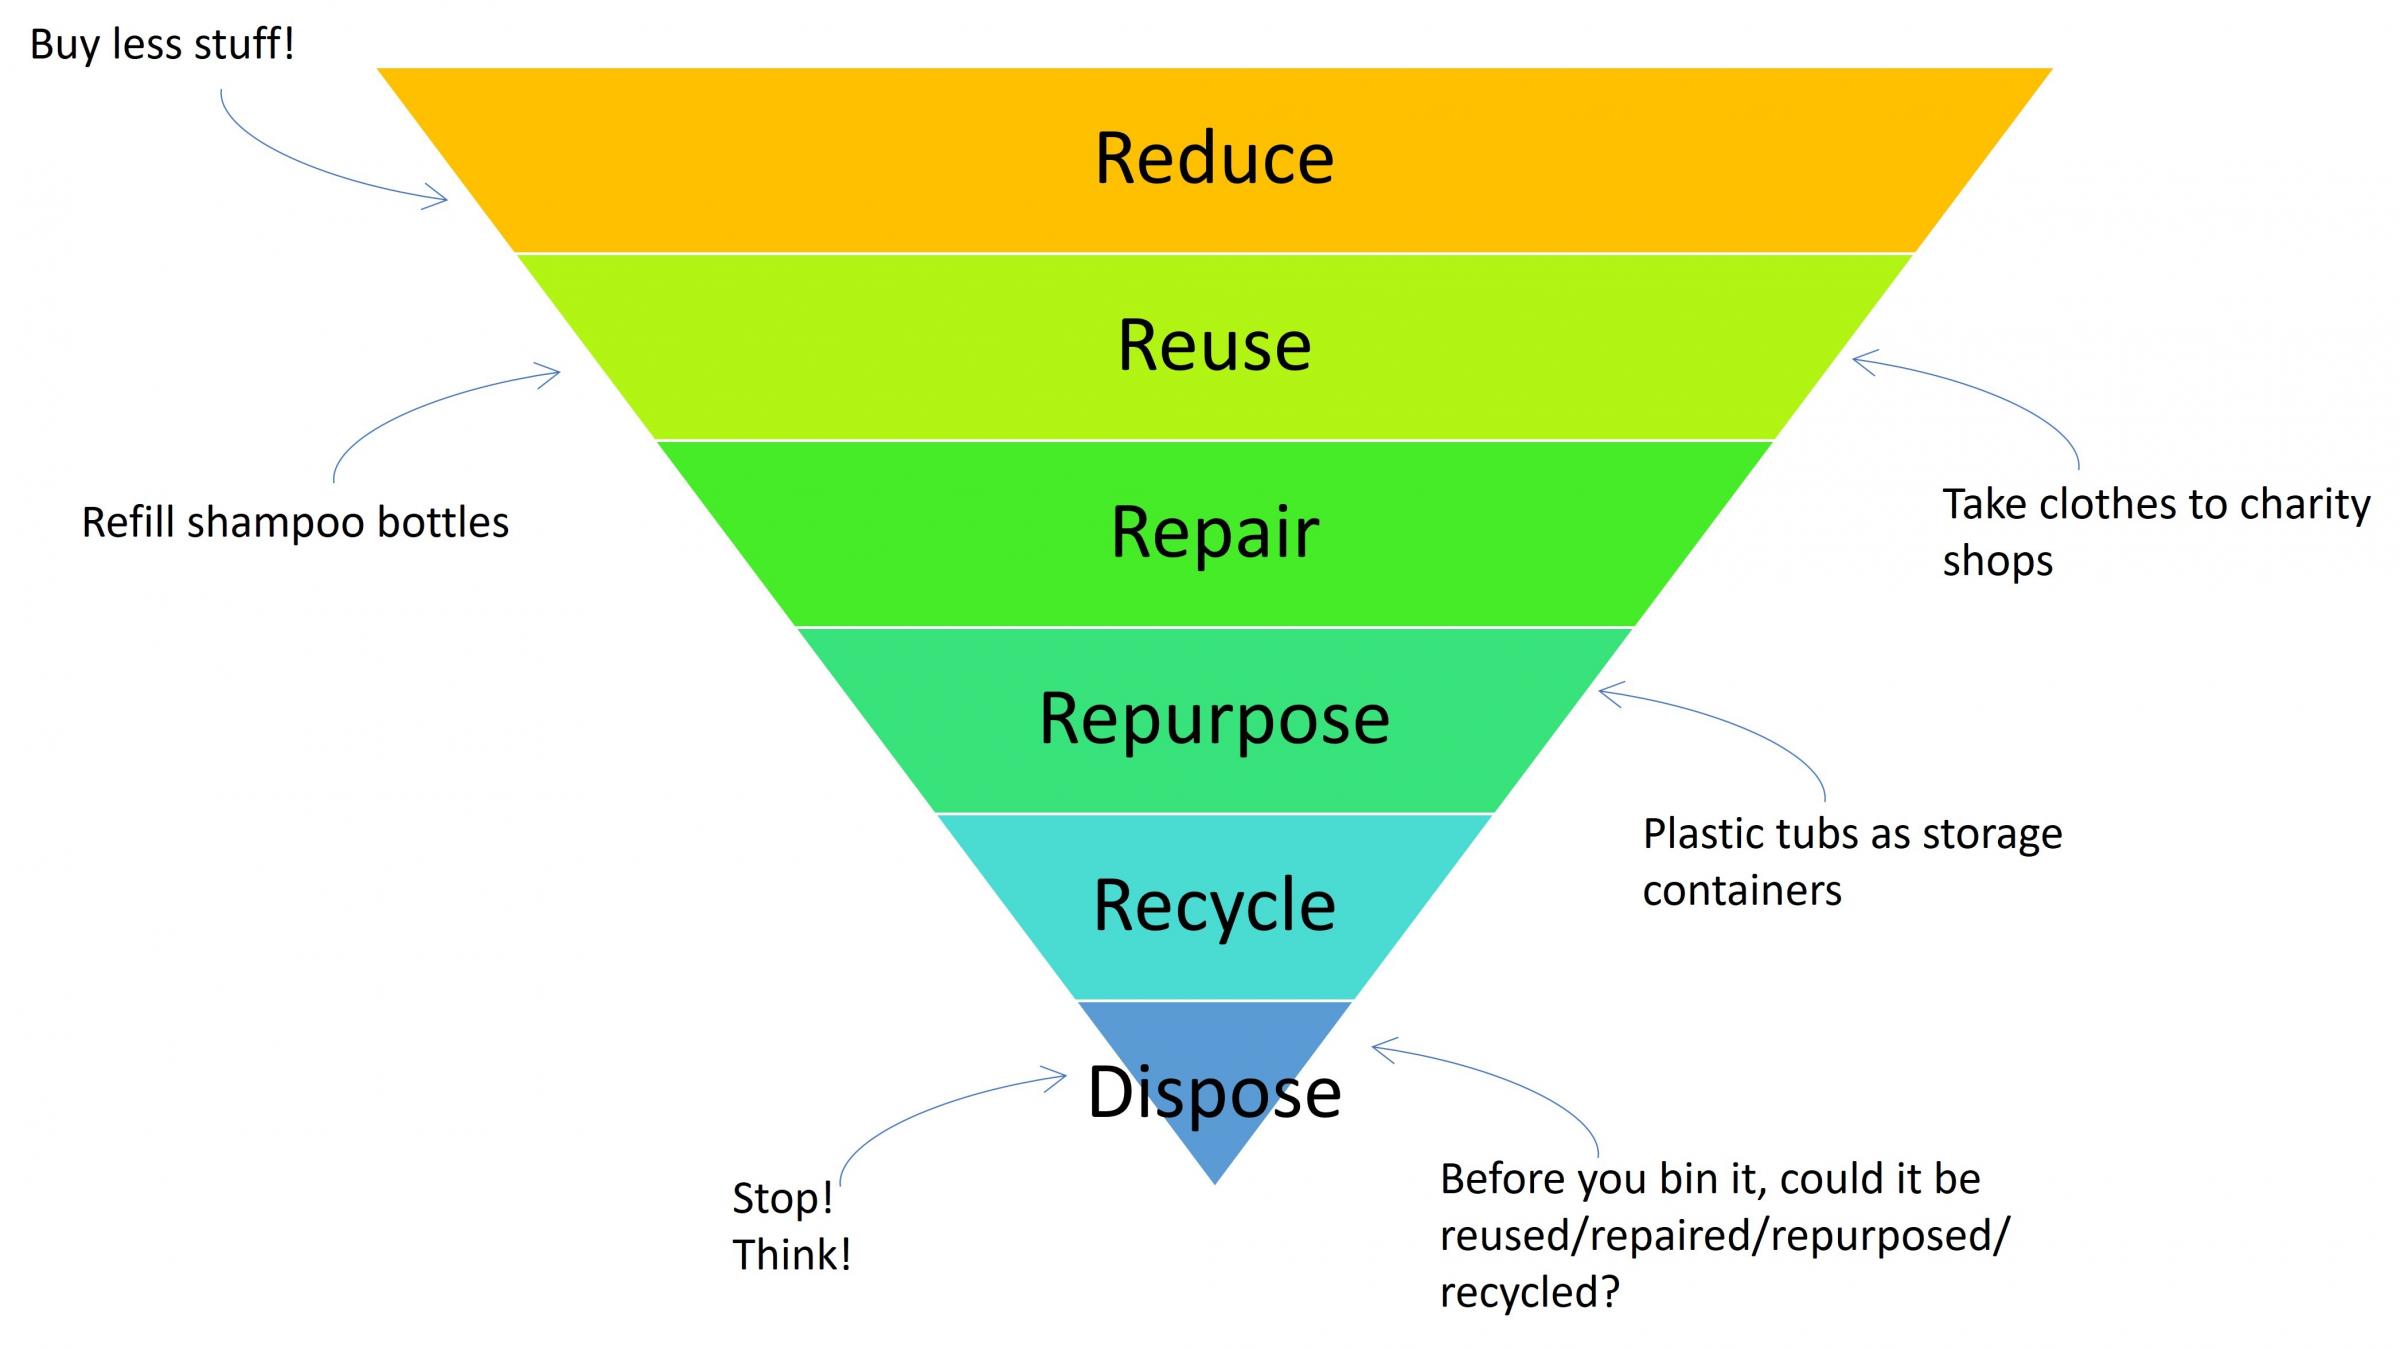 The waste pyramid